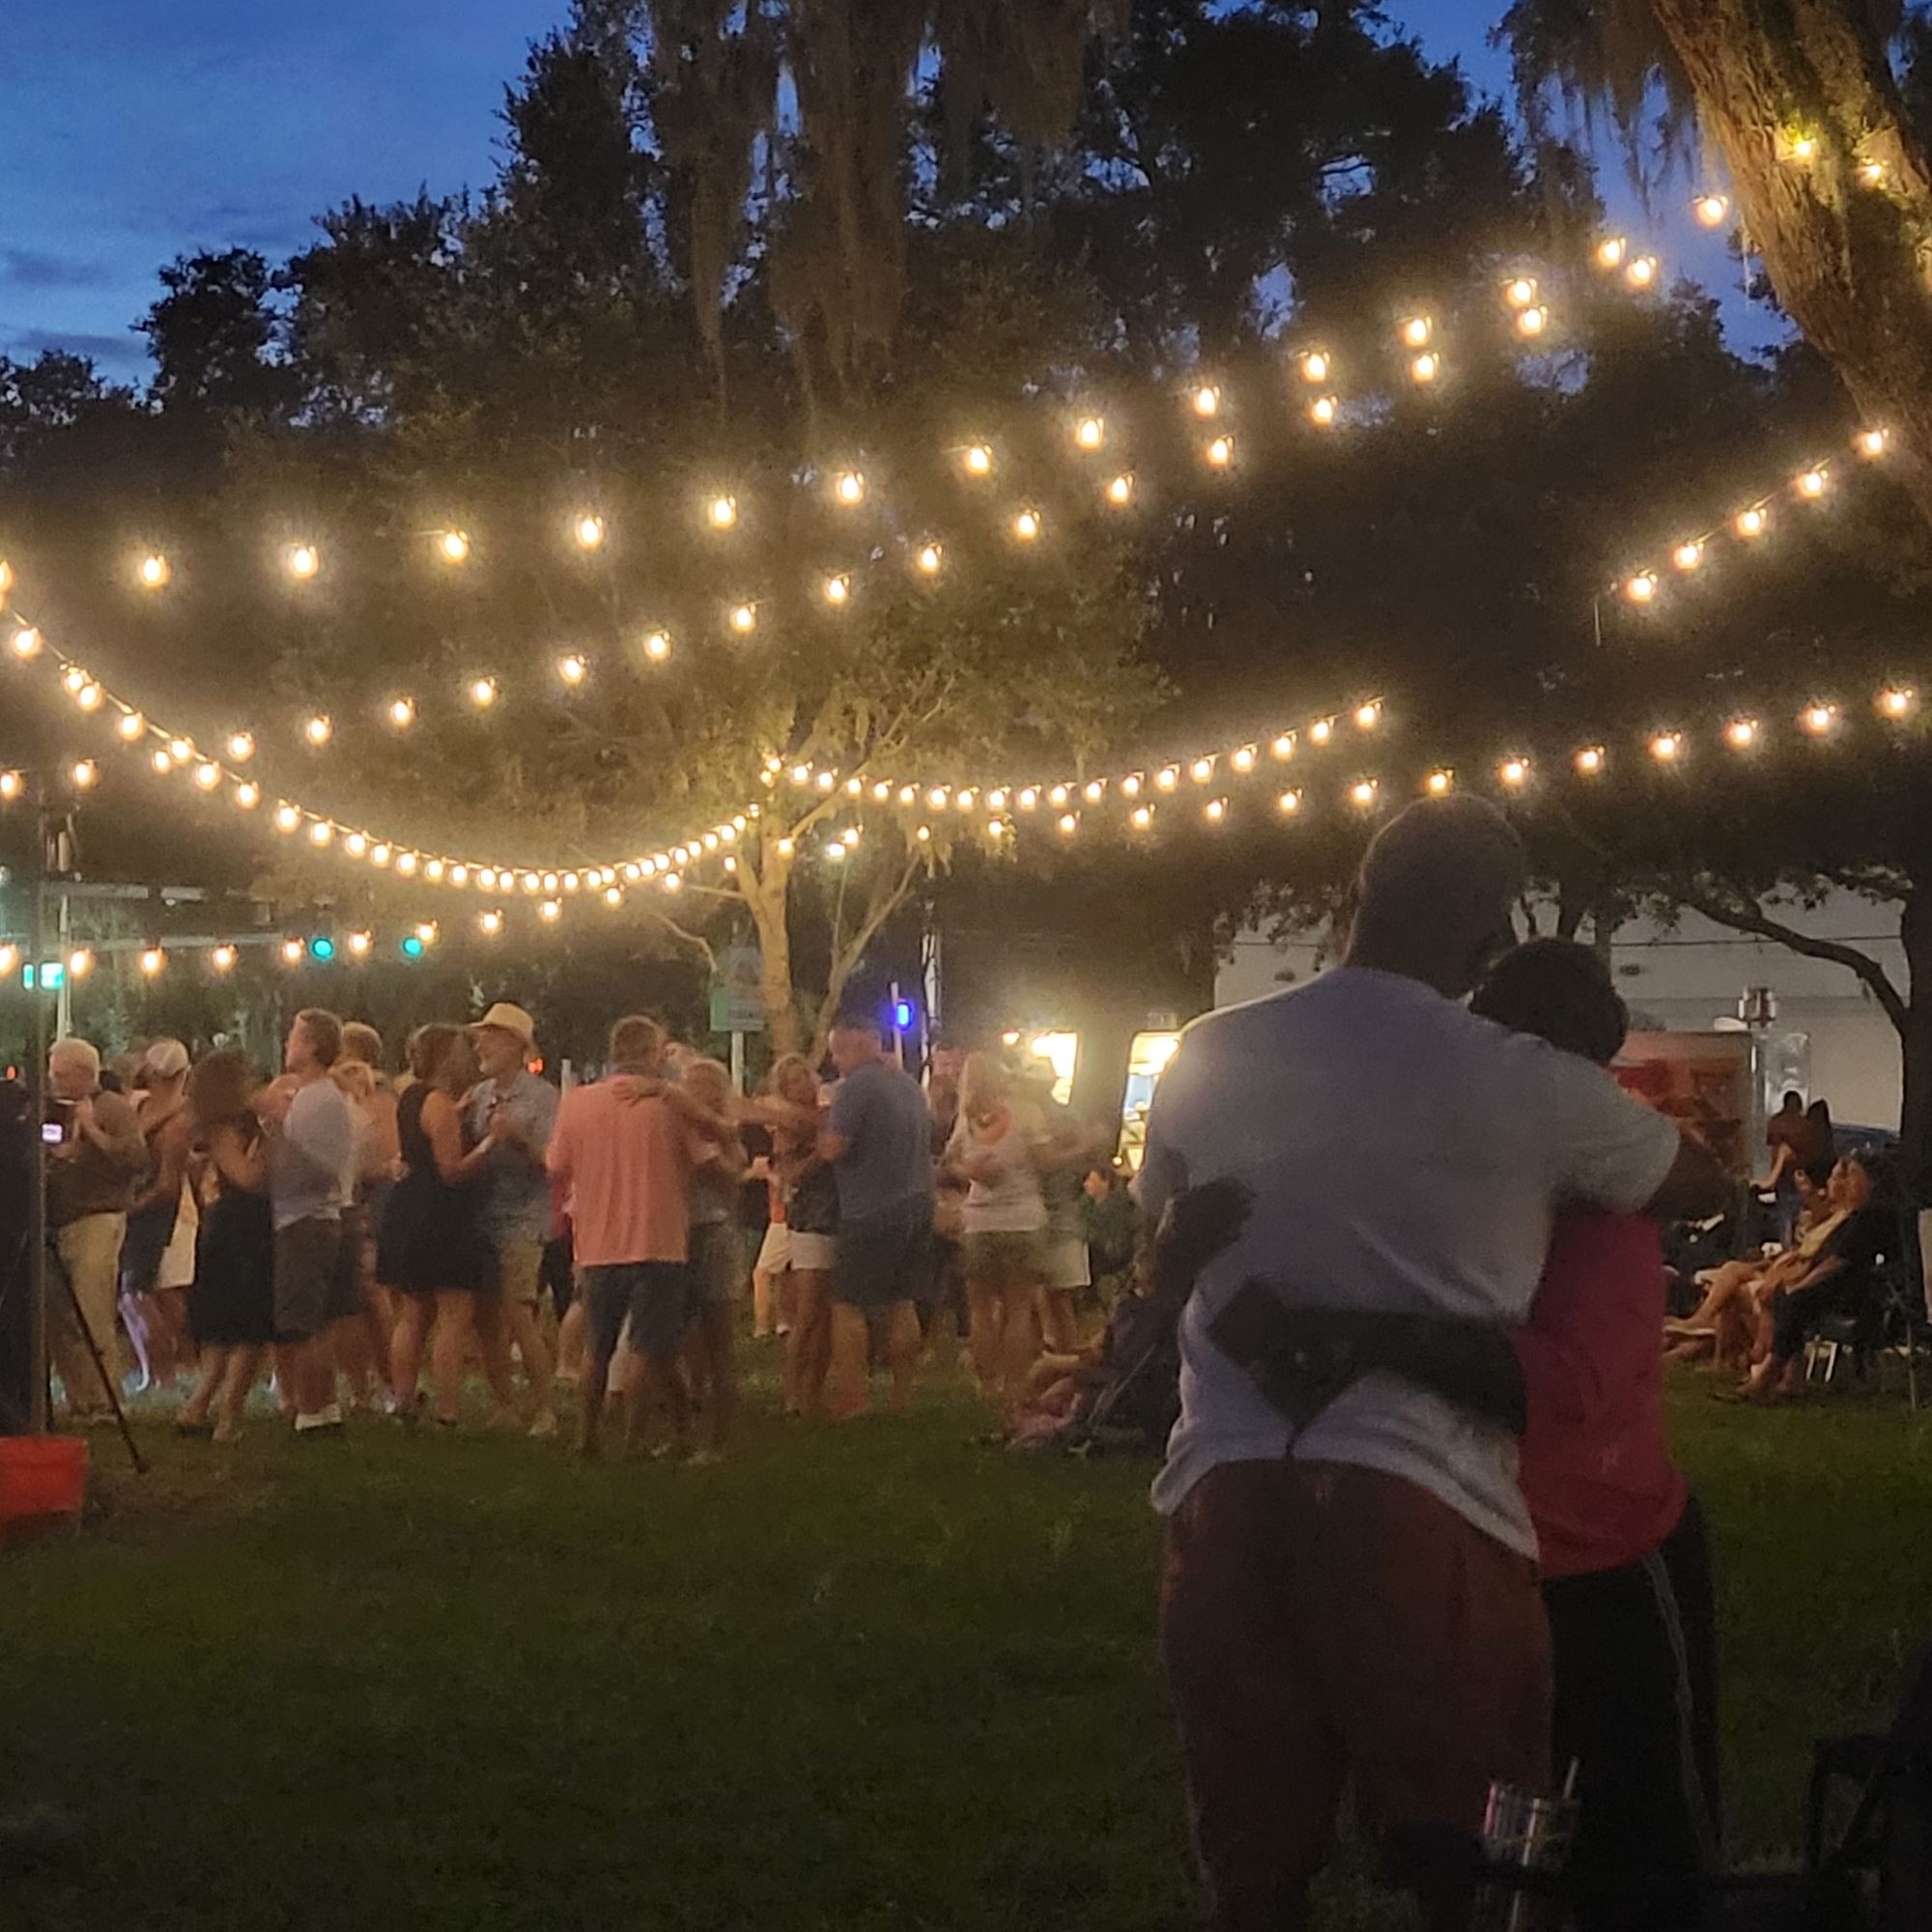 events with patio string lights and people dancing.